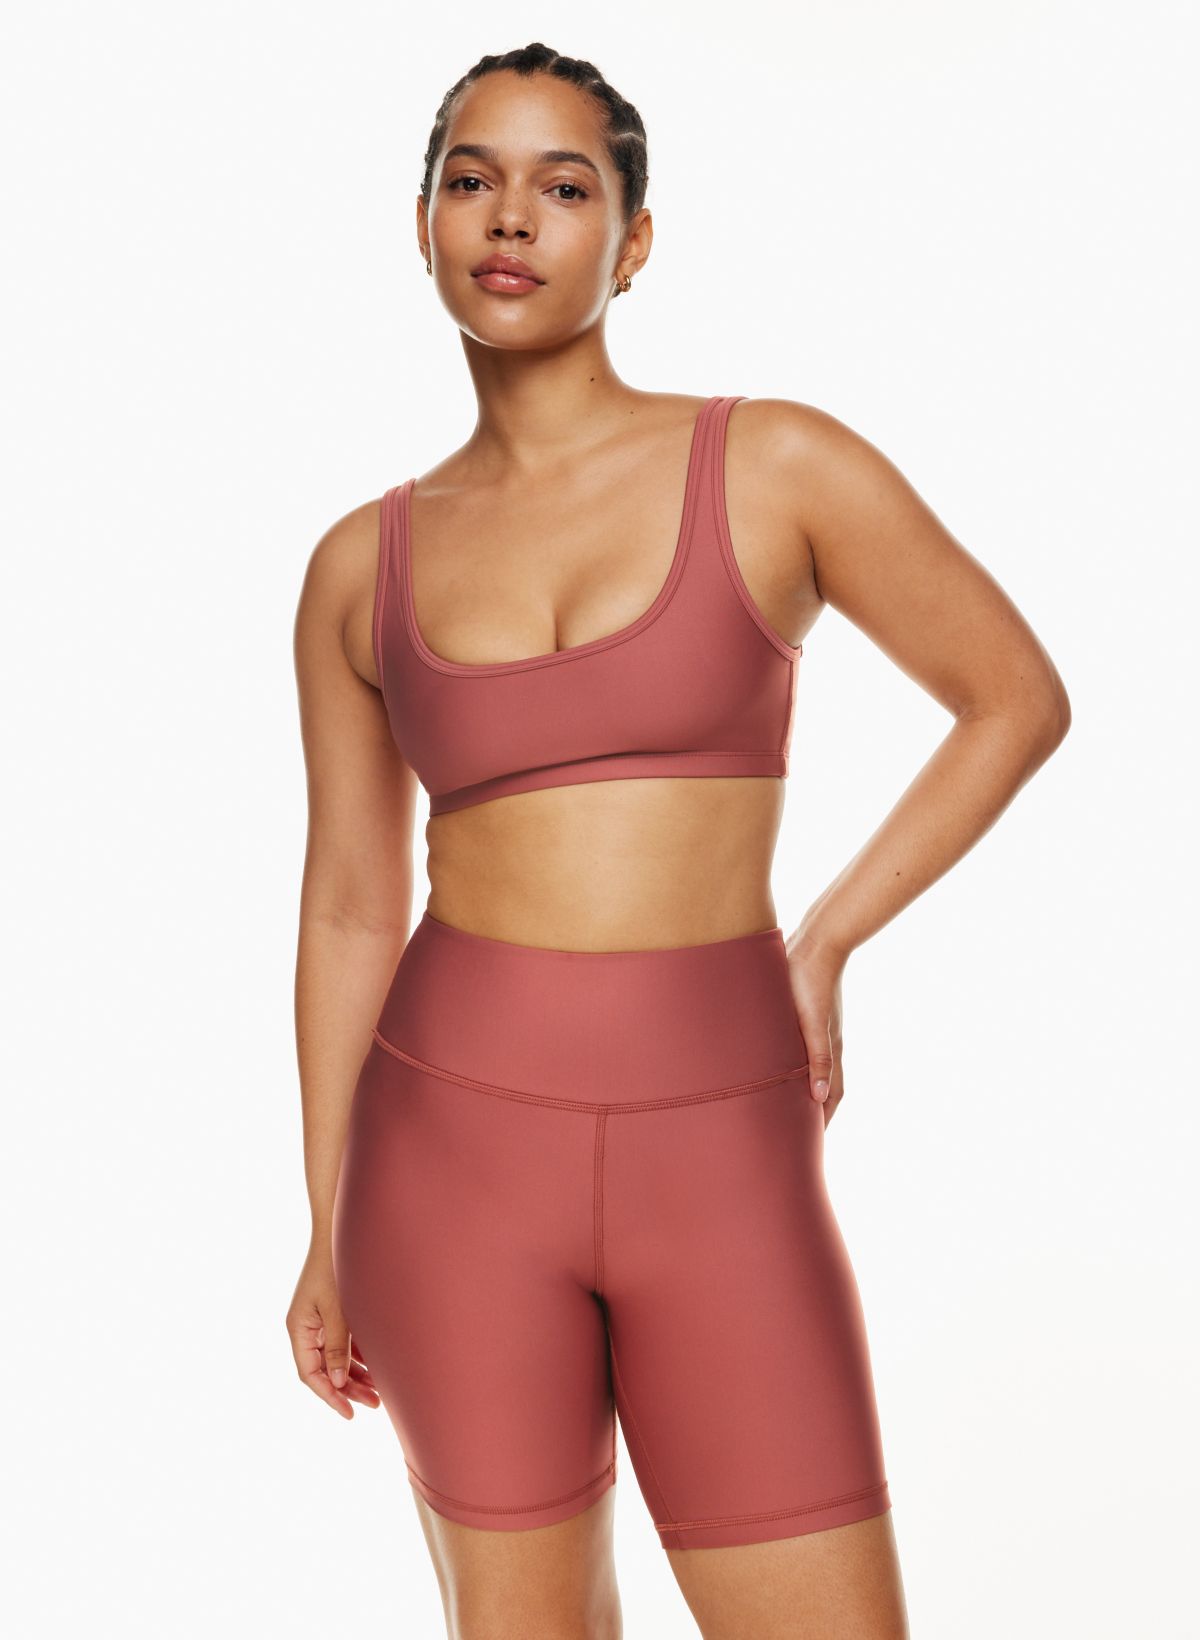 BRA TOPS ✨ Please recommend your favourite bra tops from Aritzia and why?!  : r/Aritzia